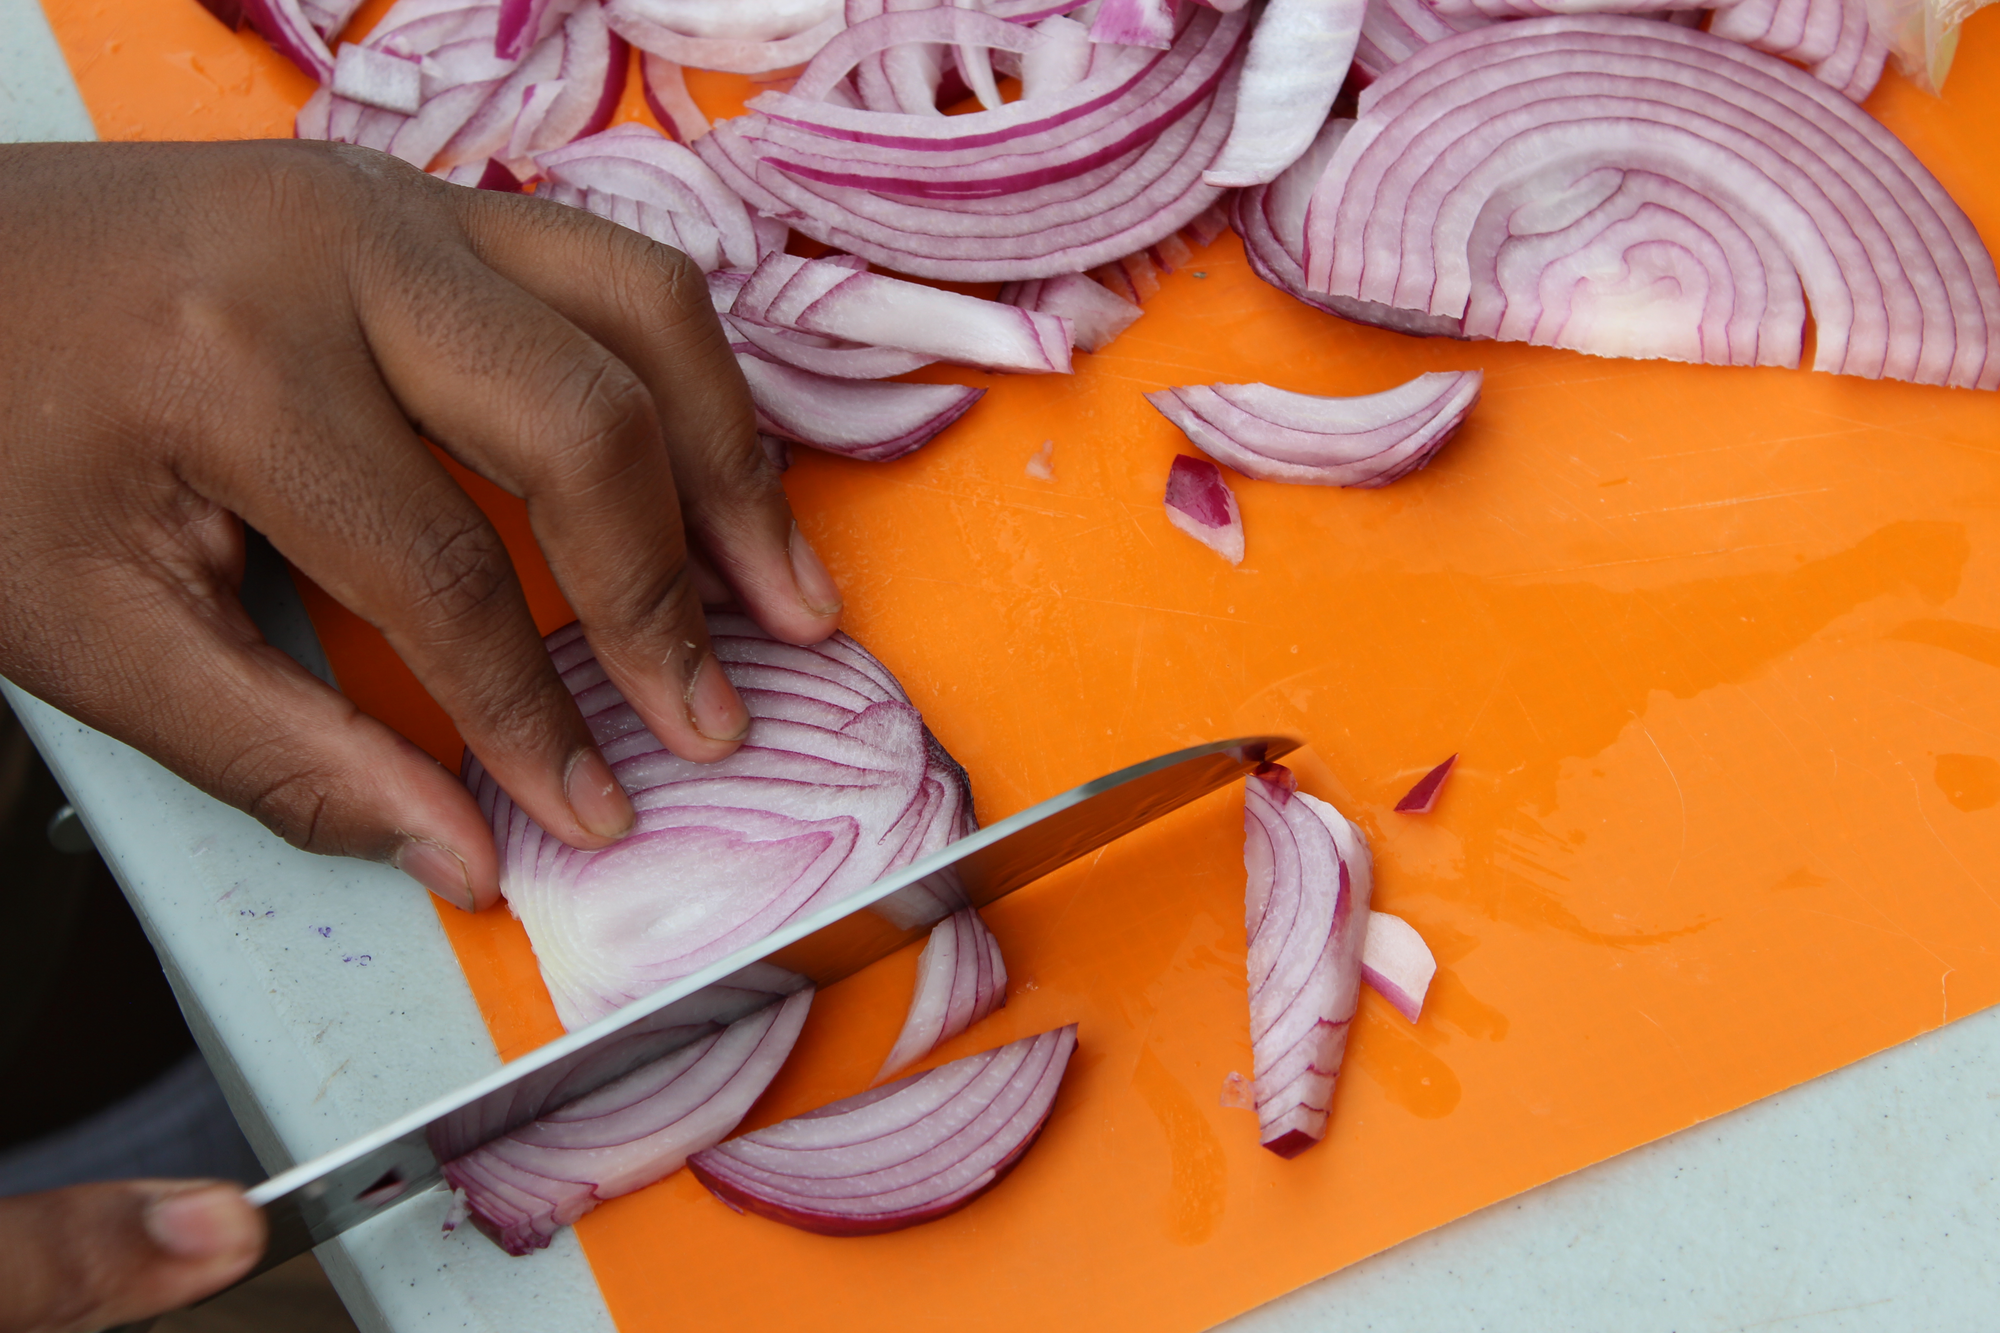 A close-up of a student's hand chopping a red onion on an orange cutting board. Massachusetts is one of many states making greater commitments to food education and nourishing school meals through food policy.